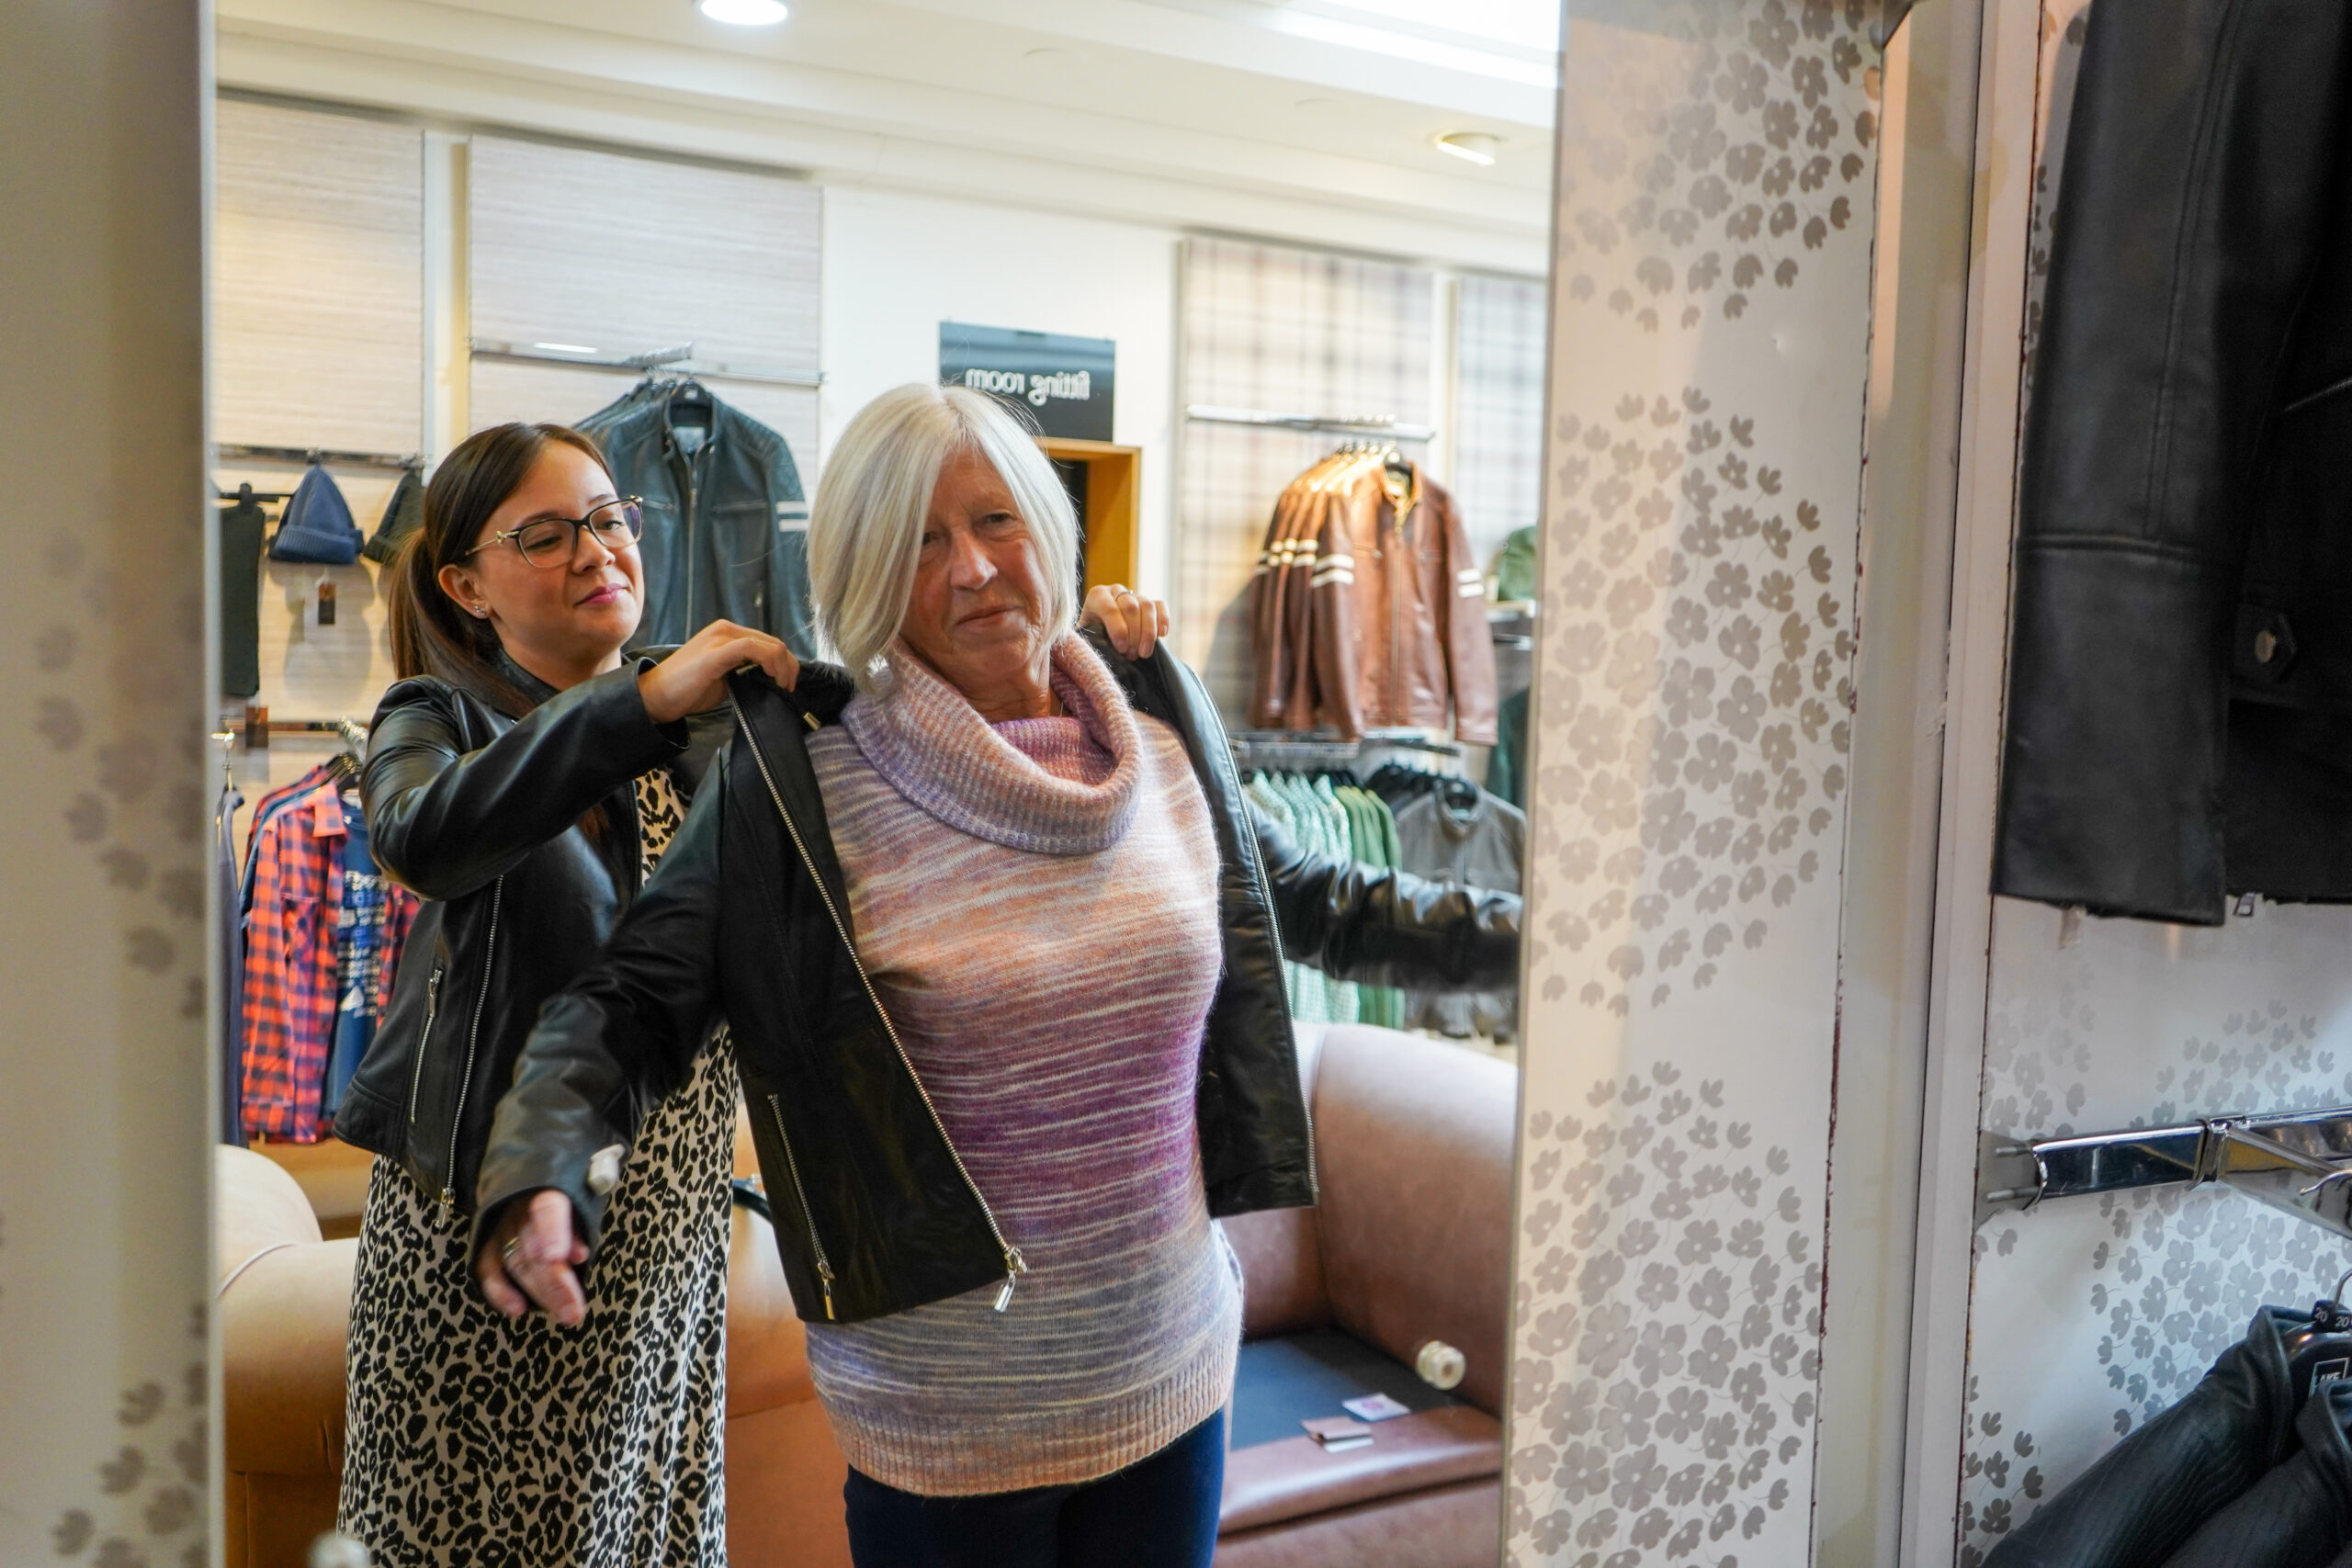 Aimee Bolton and Bev at Lakeland Leather on Lord Street in Southport. Photo by Bertie Cunningham Southport BID